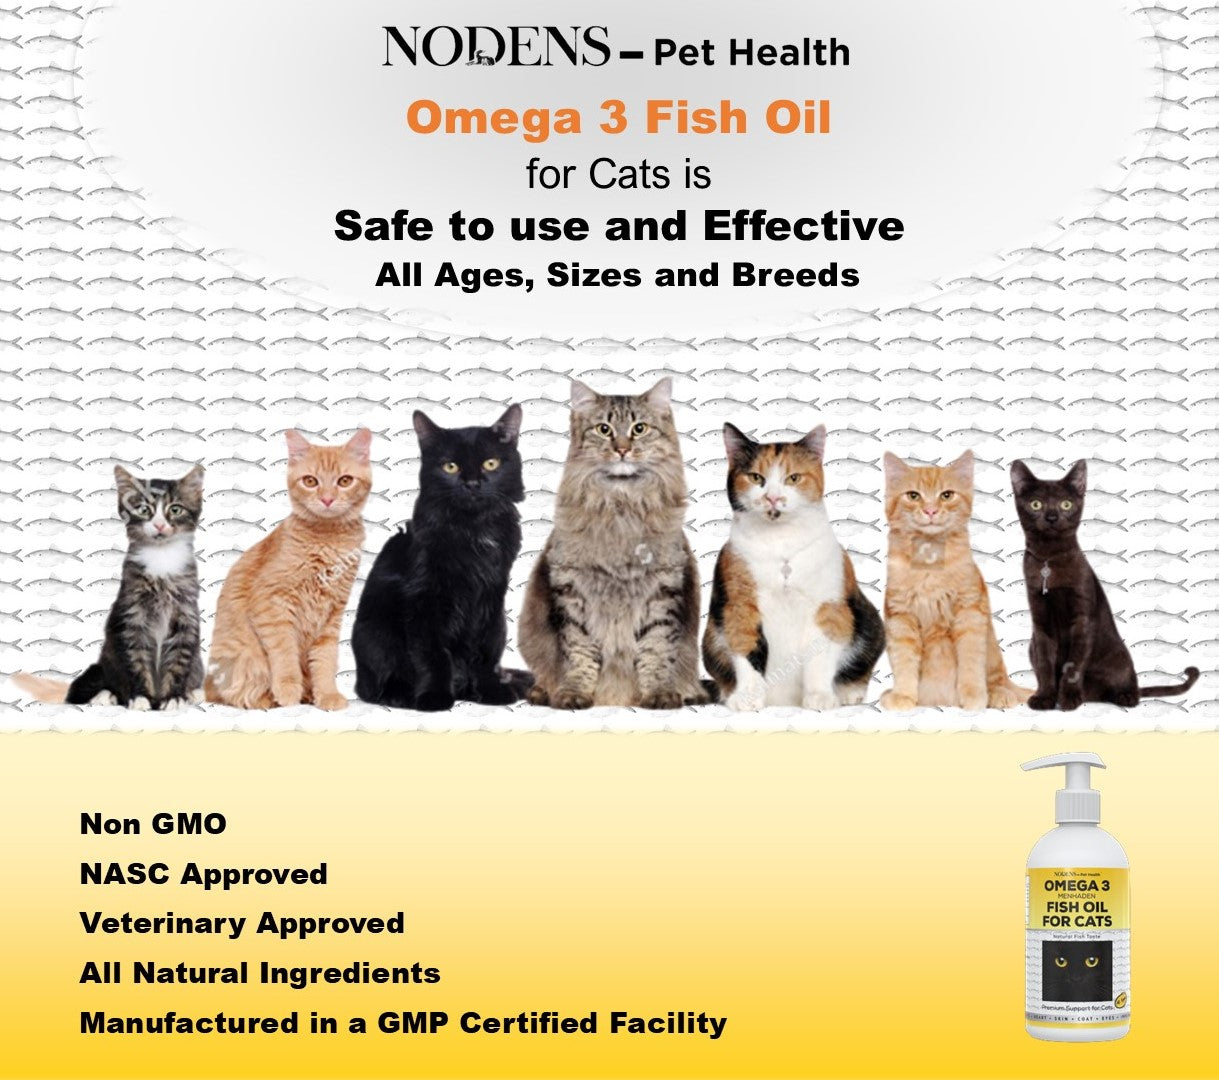 Nodens Omega 3 for Cats, Natural DPA+EPA+DHA Fatty Acids for healthy skin & shiny coat, improved immunity, joint support, reduced allergies - pure menhaden fish oil for cats of all ages